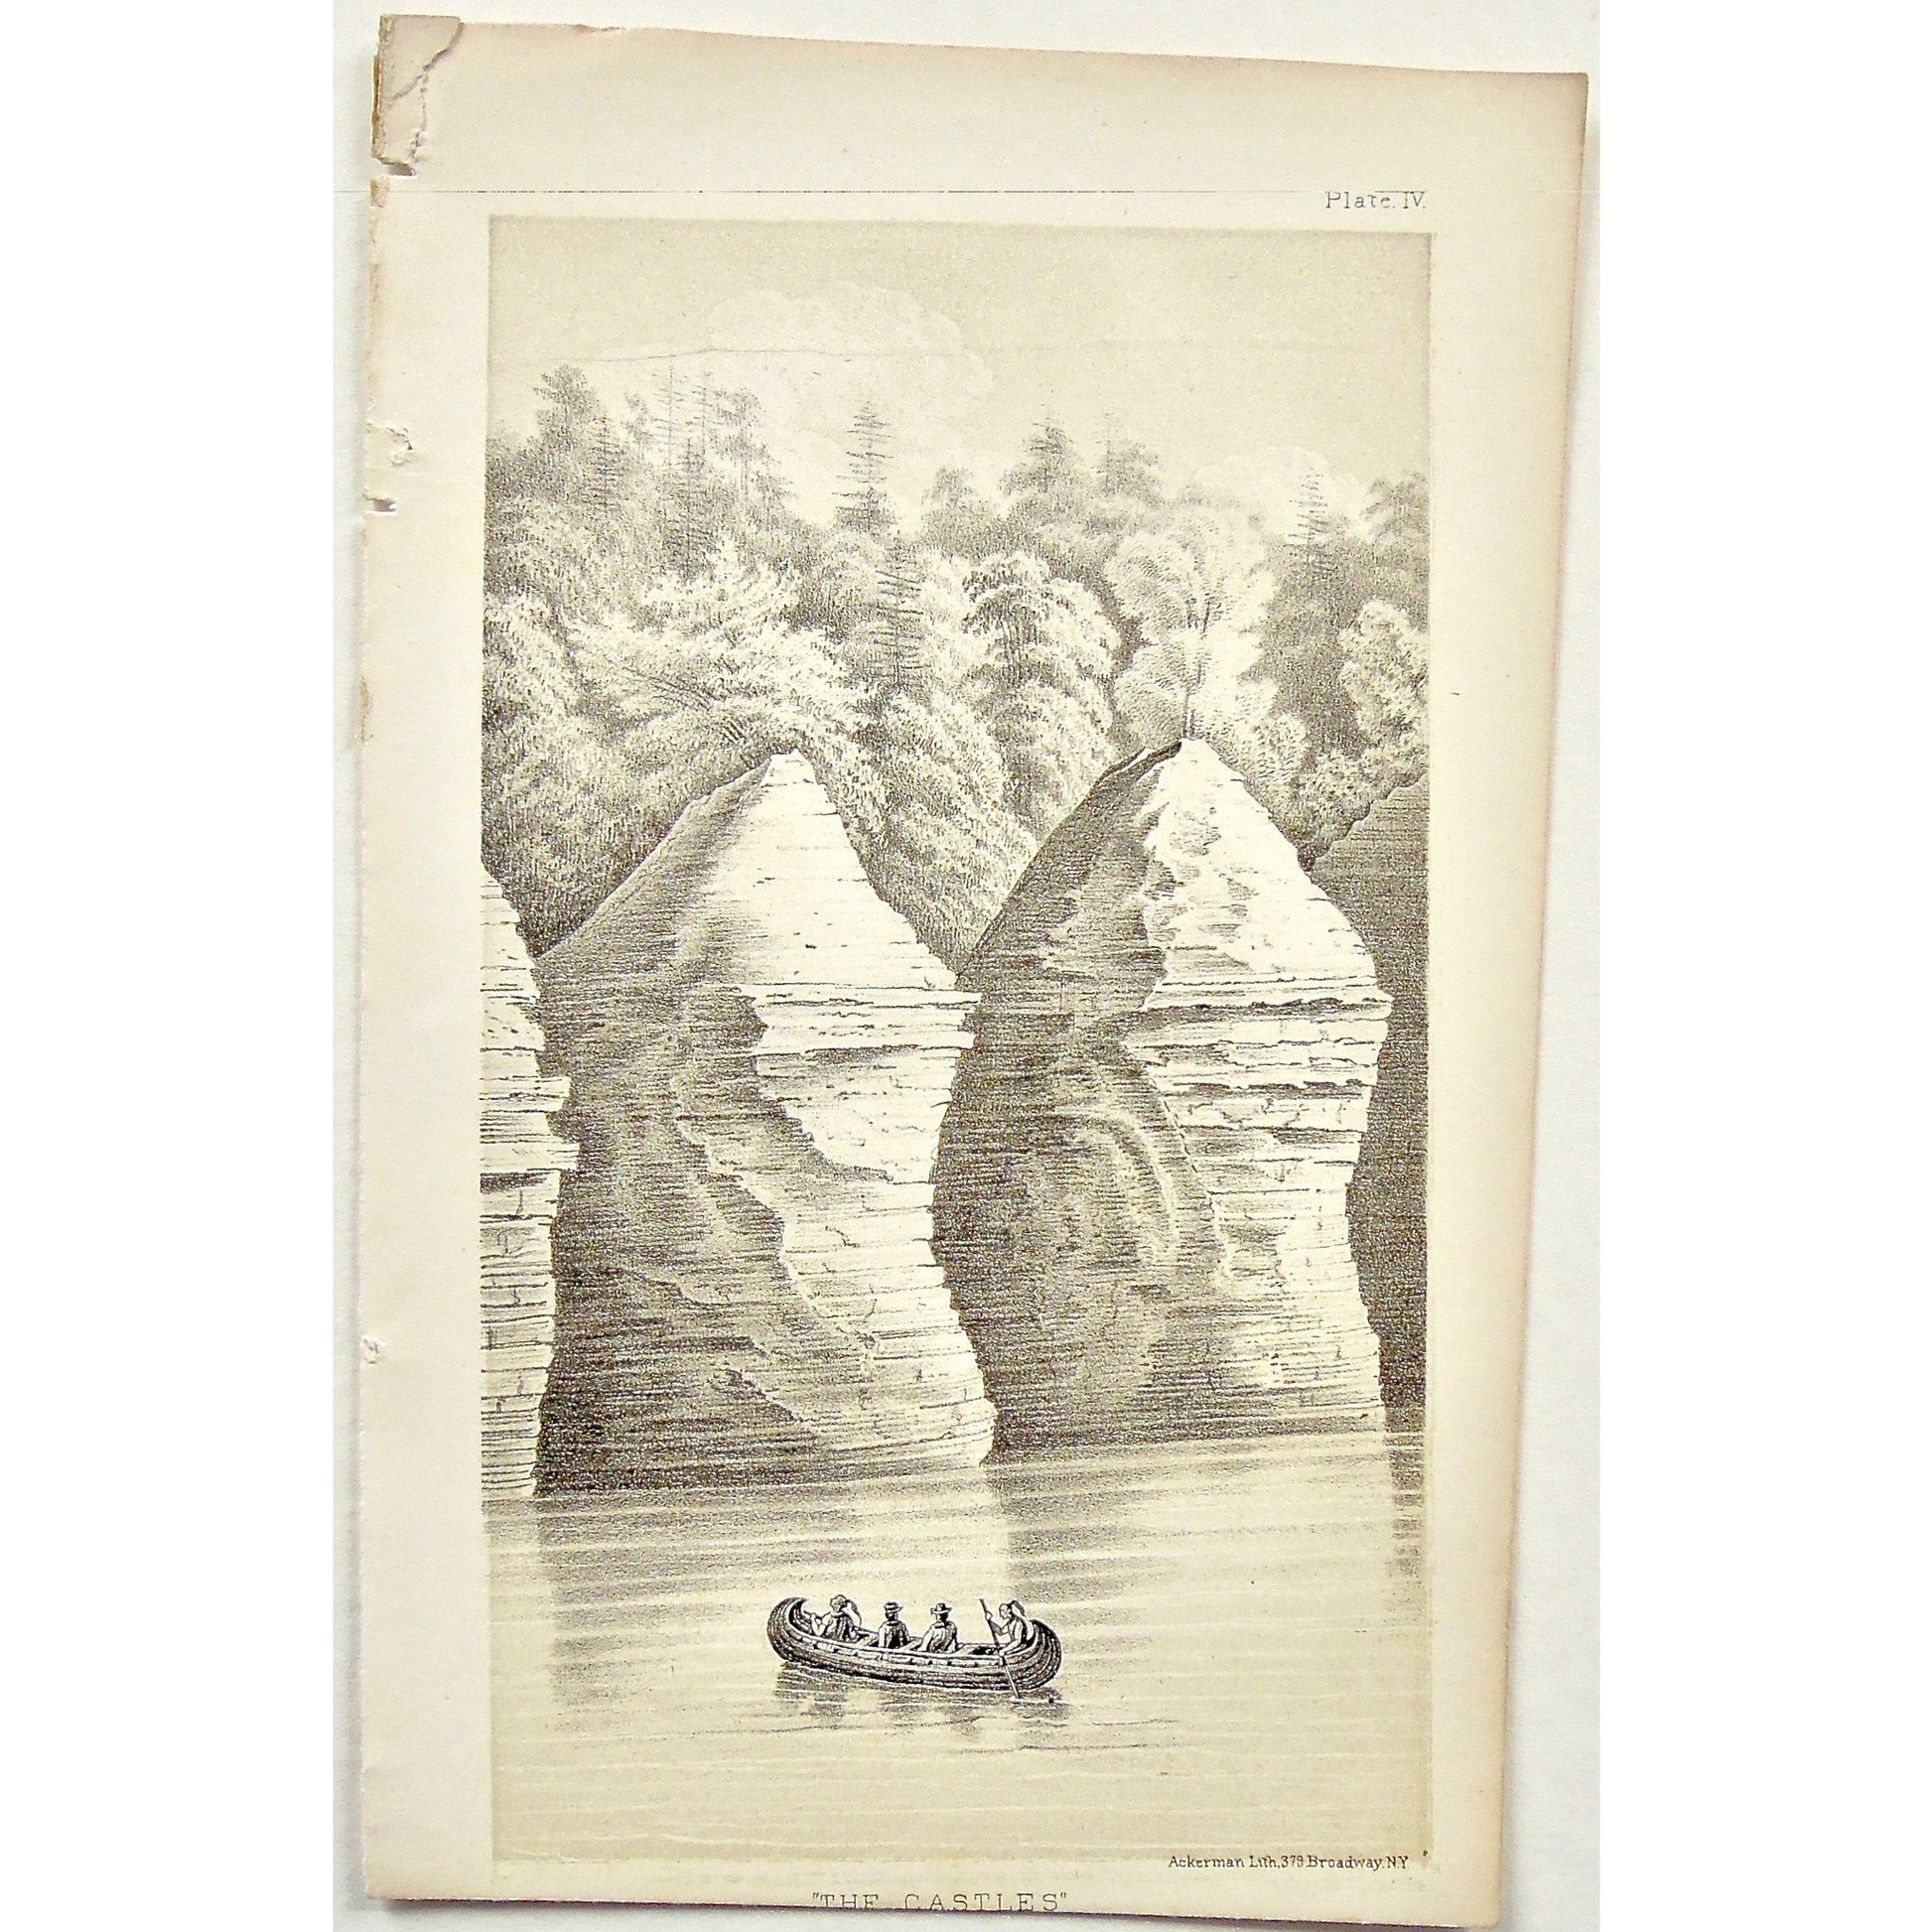 The castles, Castles, rocks, rock formation, rowing, row boat, boat, view, from the water, Landscape, Lake Superior, Lake, Superior, National Lakeshore, Lakeshore, Michigan, MI, Ackerman, 379 Broadway, Foster, Whitney, House of Representatives, House of Reps., Report, Geology, Topography, Land District, State of Michigan, Part II, The Iron Region, General Geology, Washington D.C., Washington, DC, D.C., 1851, lithograph, two-toned, Antique Print, Antique, Prints, Vintage, Art, Wall art, Decor, wall decor, de